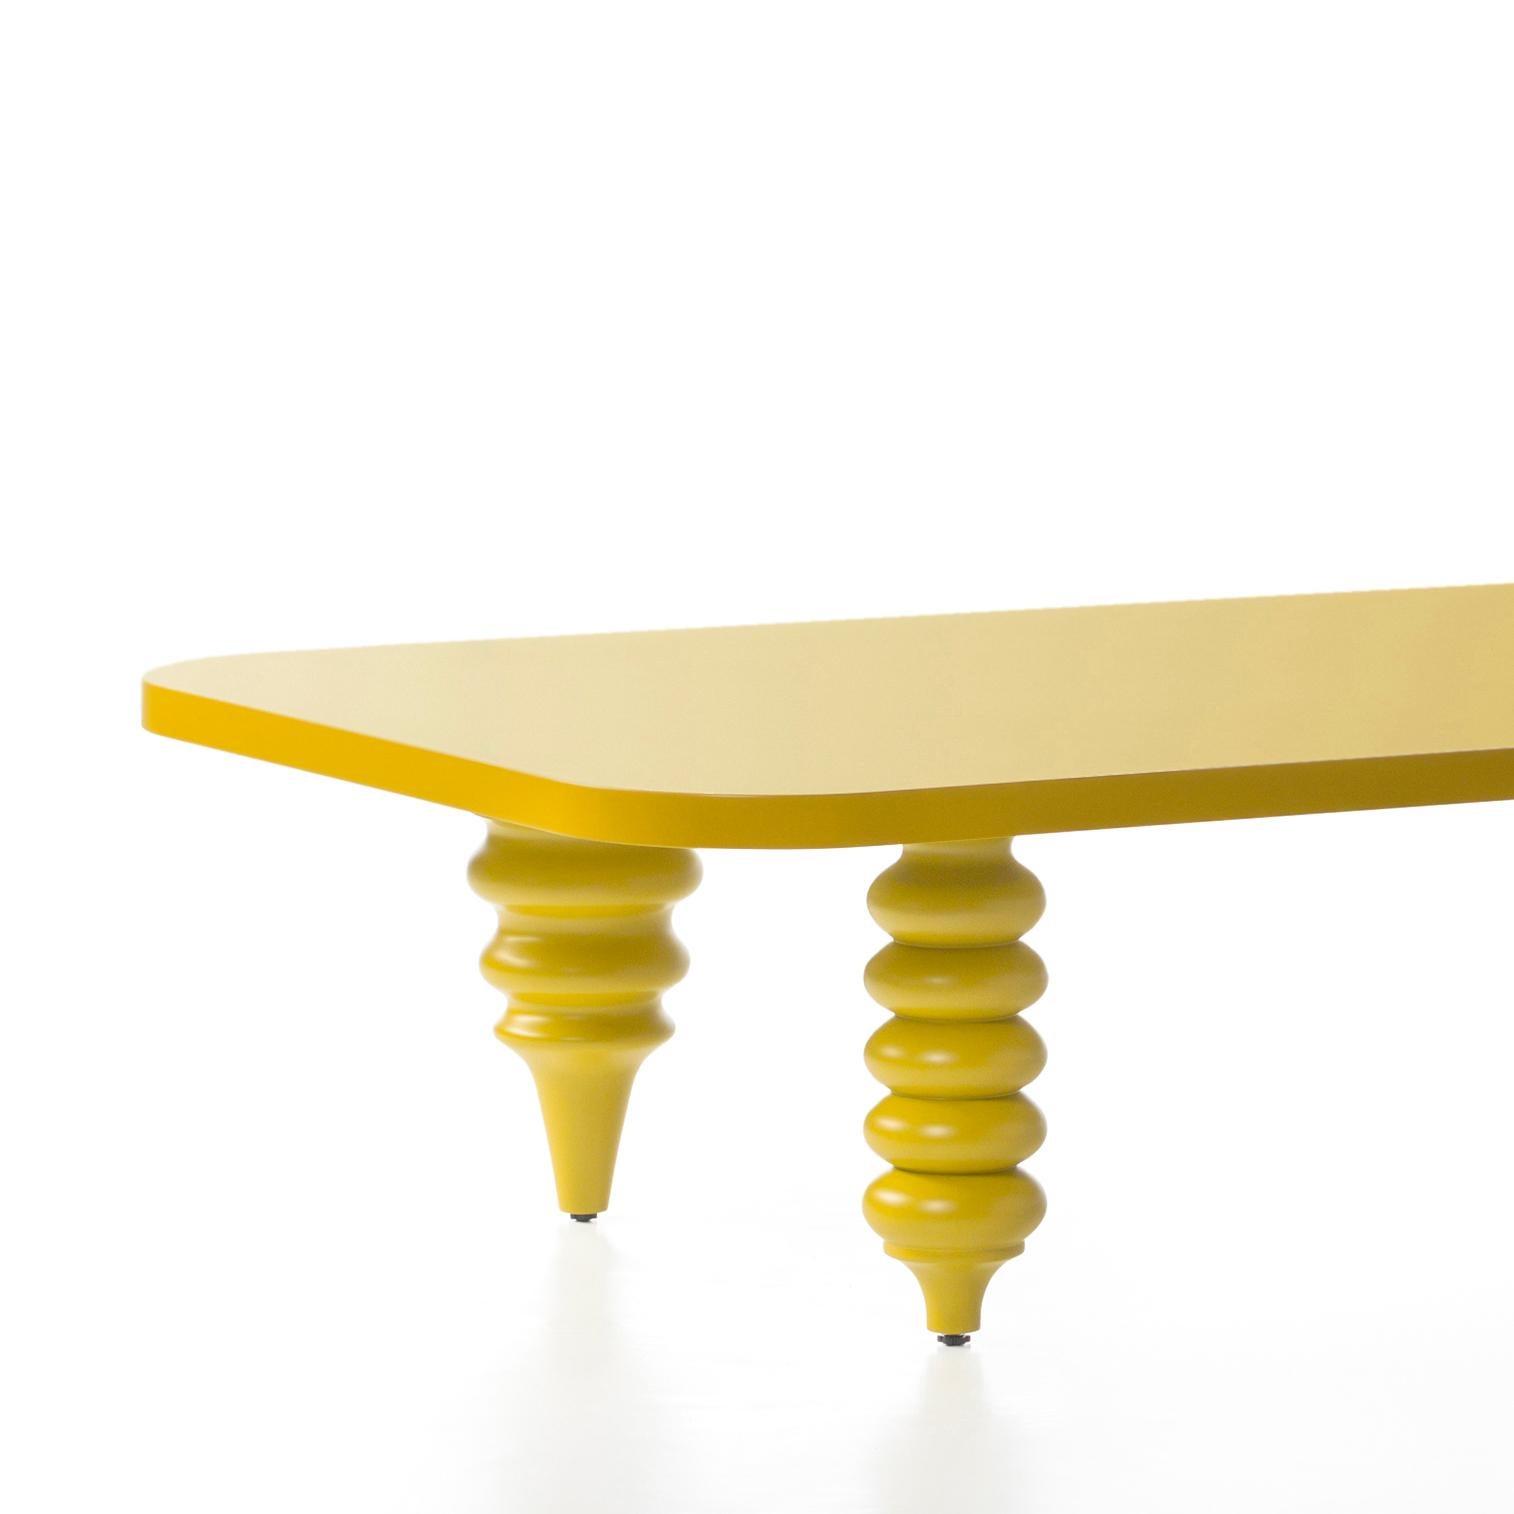 Low table designed by Jaime Hayon manufactured in Barcelona by BD

MDF base and legs in turned solid alder wood, lacquered in yellow 

Measures: 50 x 150 x H 35 cm.